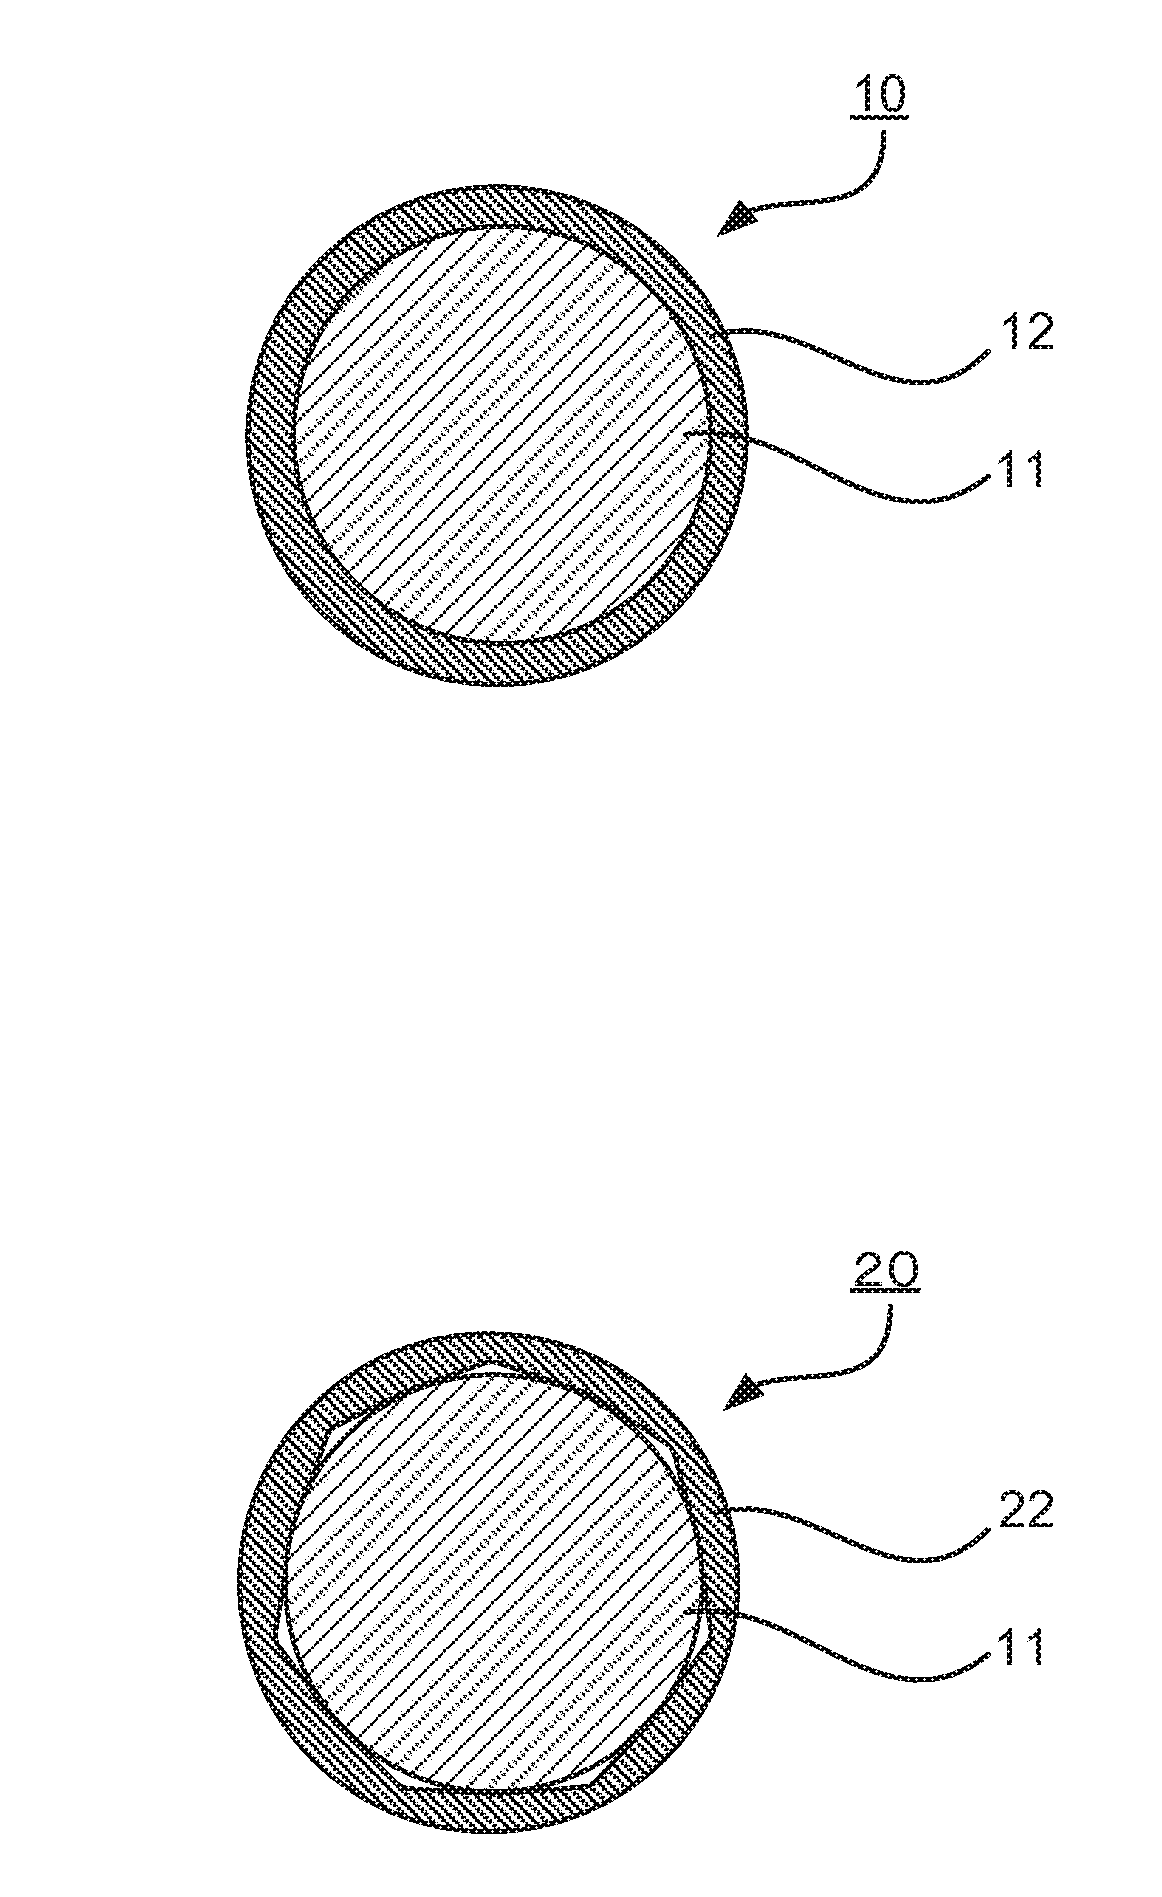 Conductive member, image forming apparatus, conductive particle and method for manufacturing the same